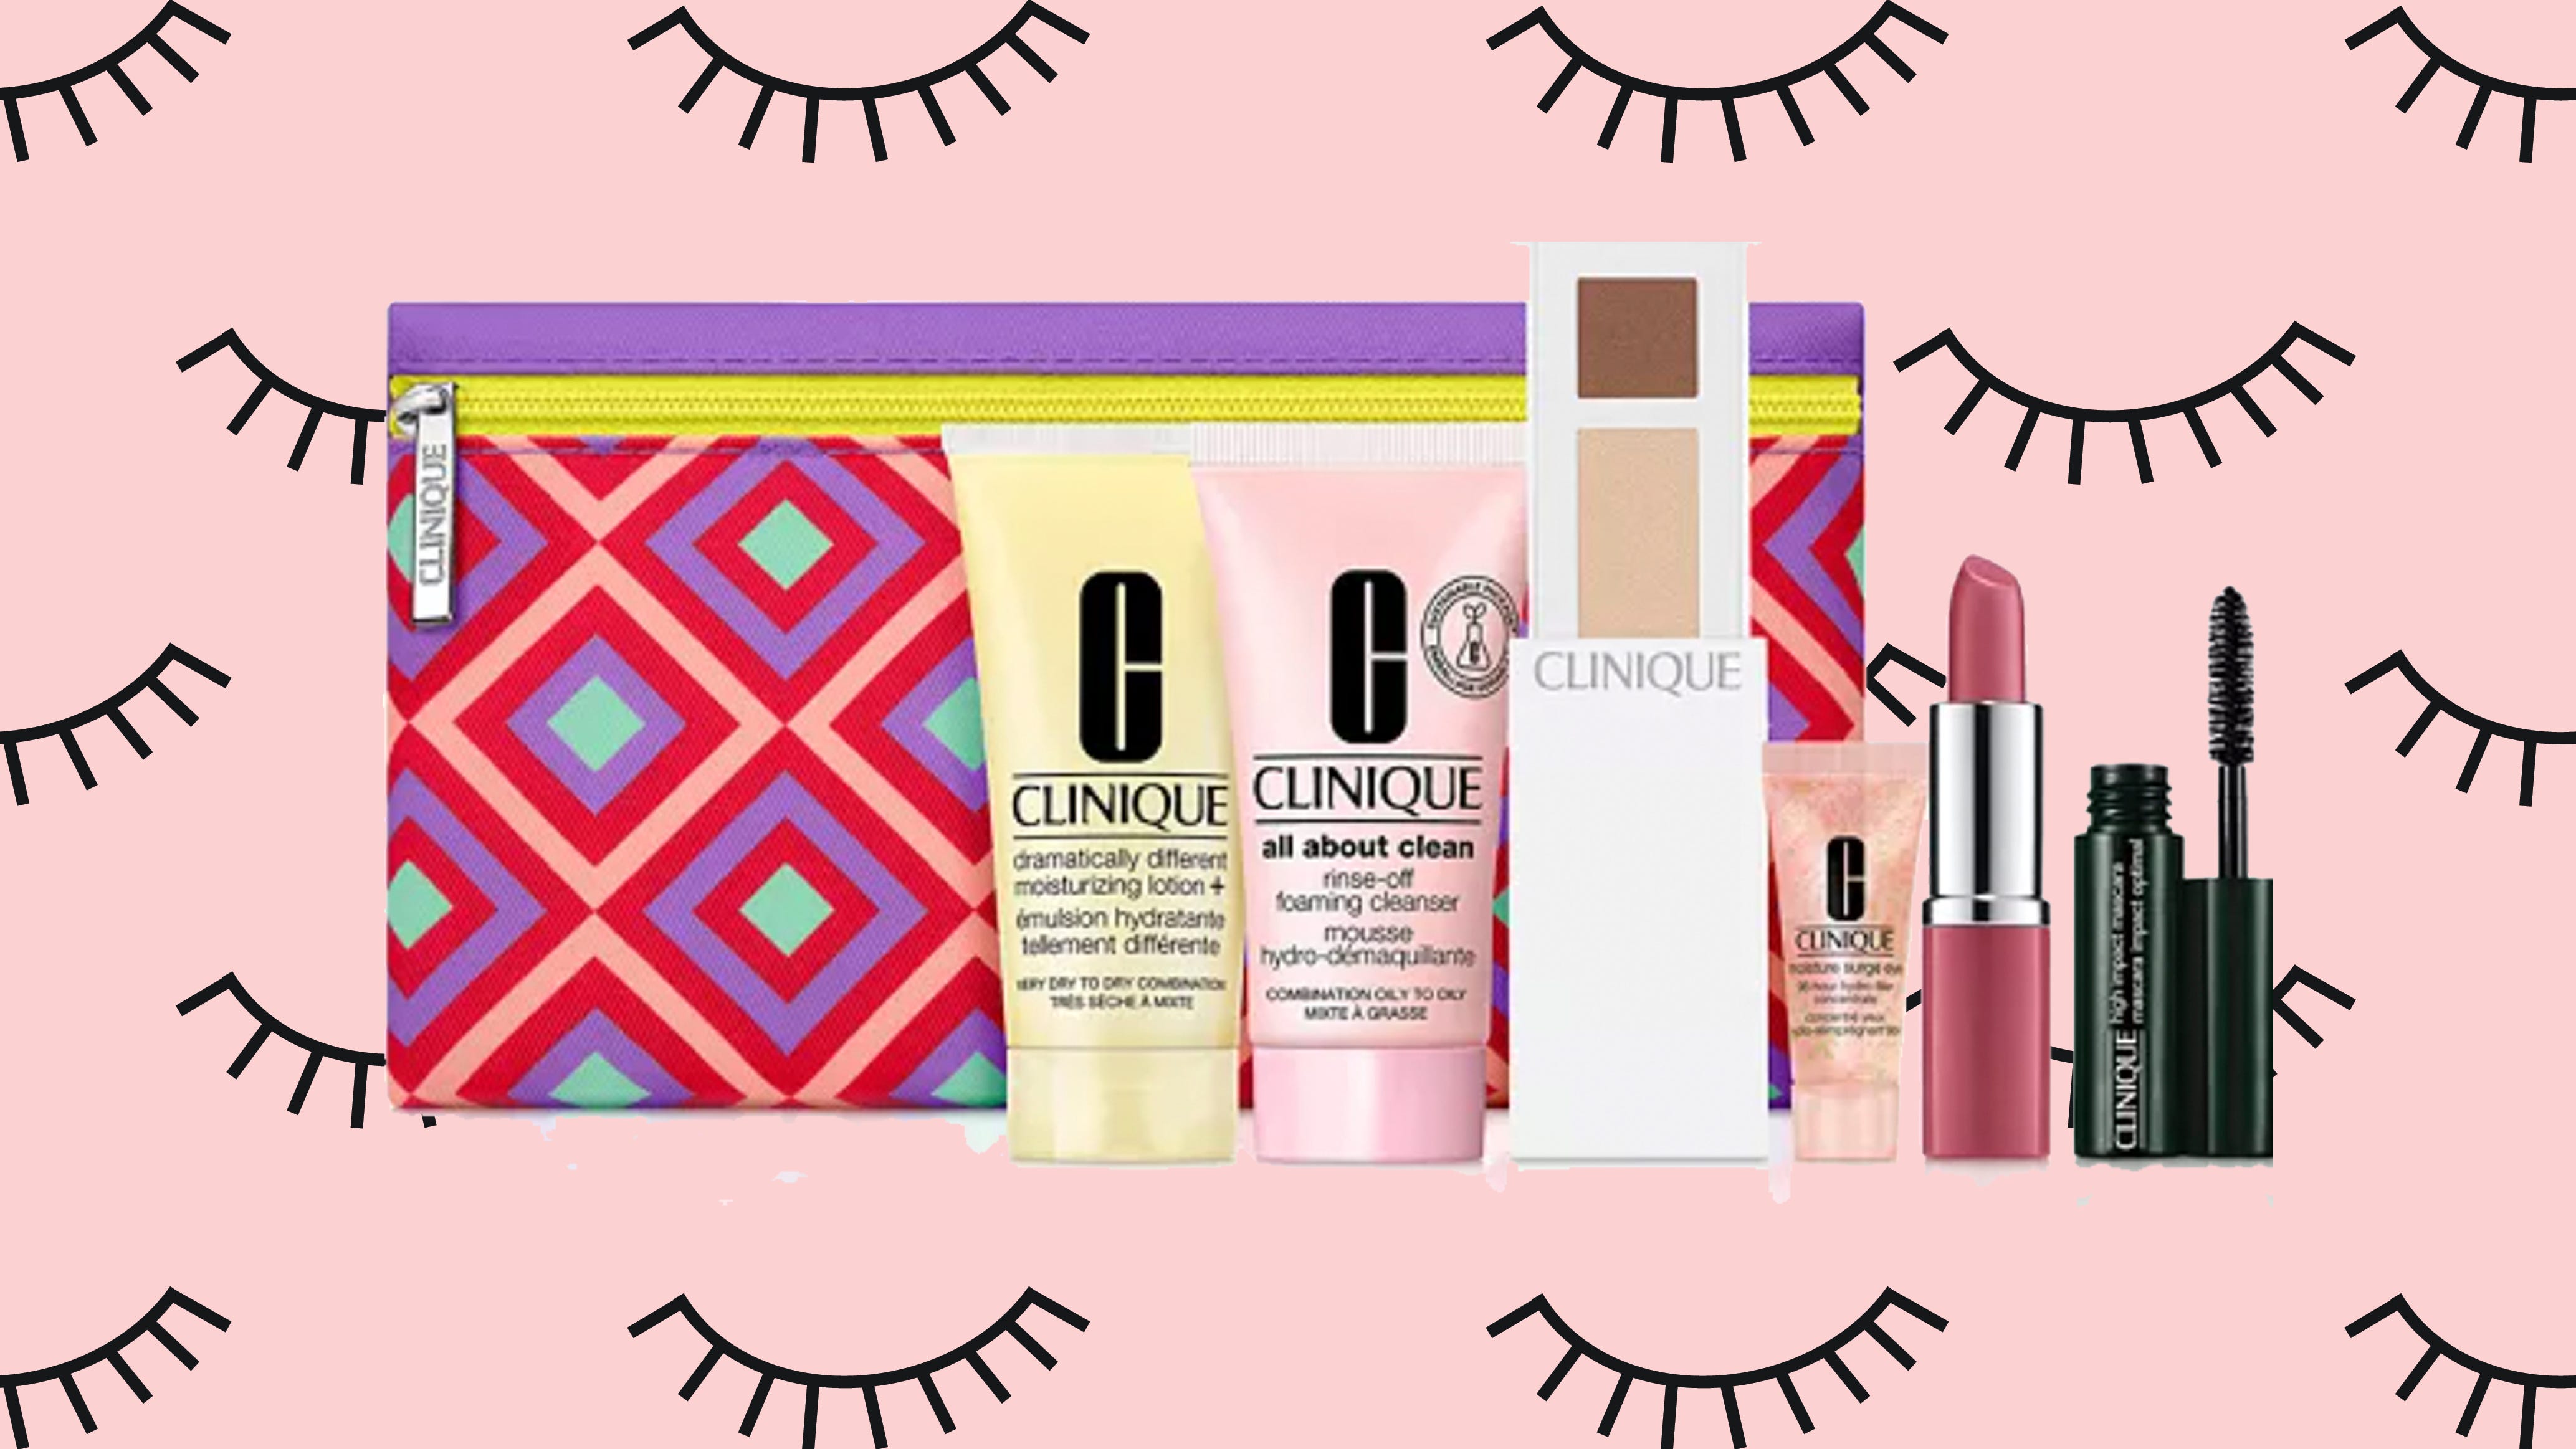 Clinique with purchase: a free goody bag with